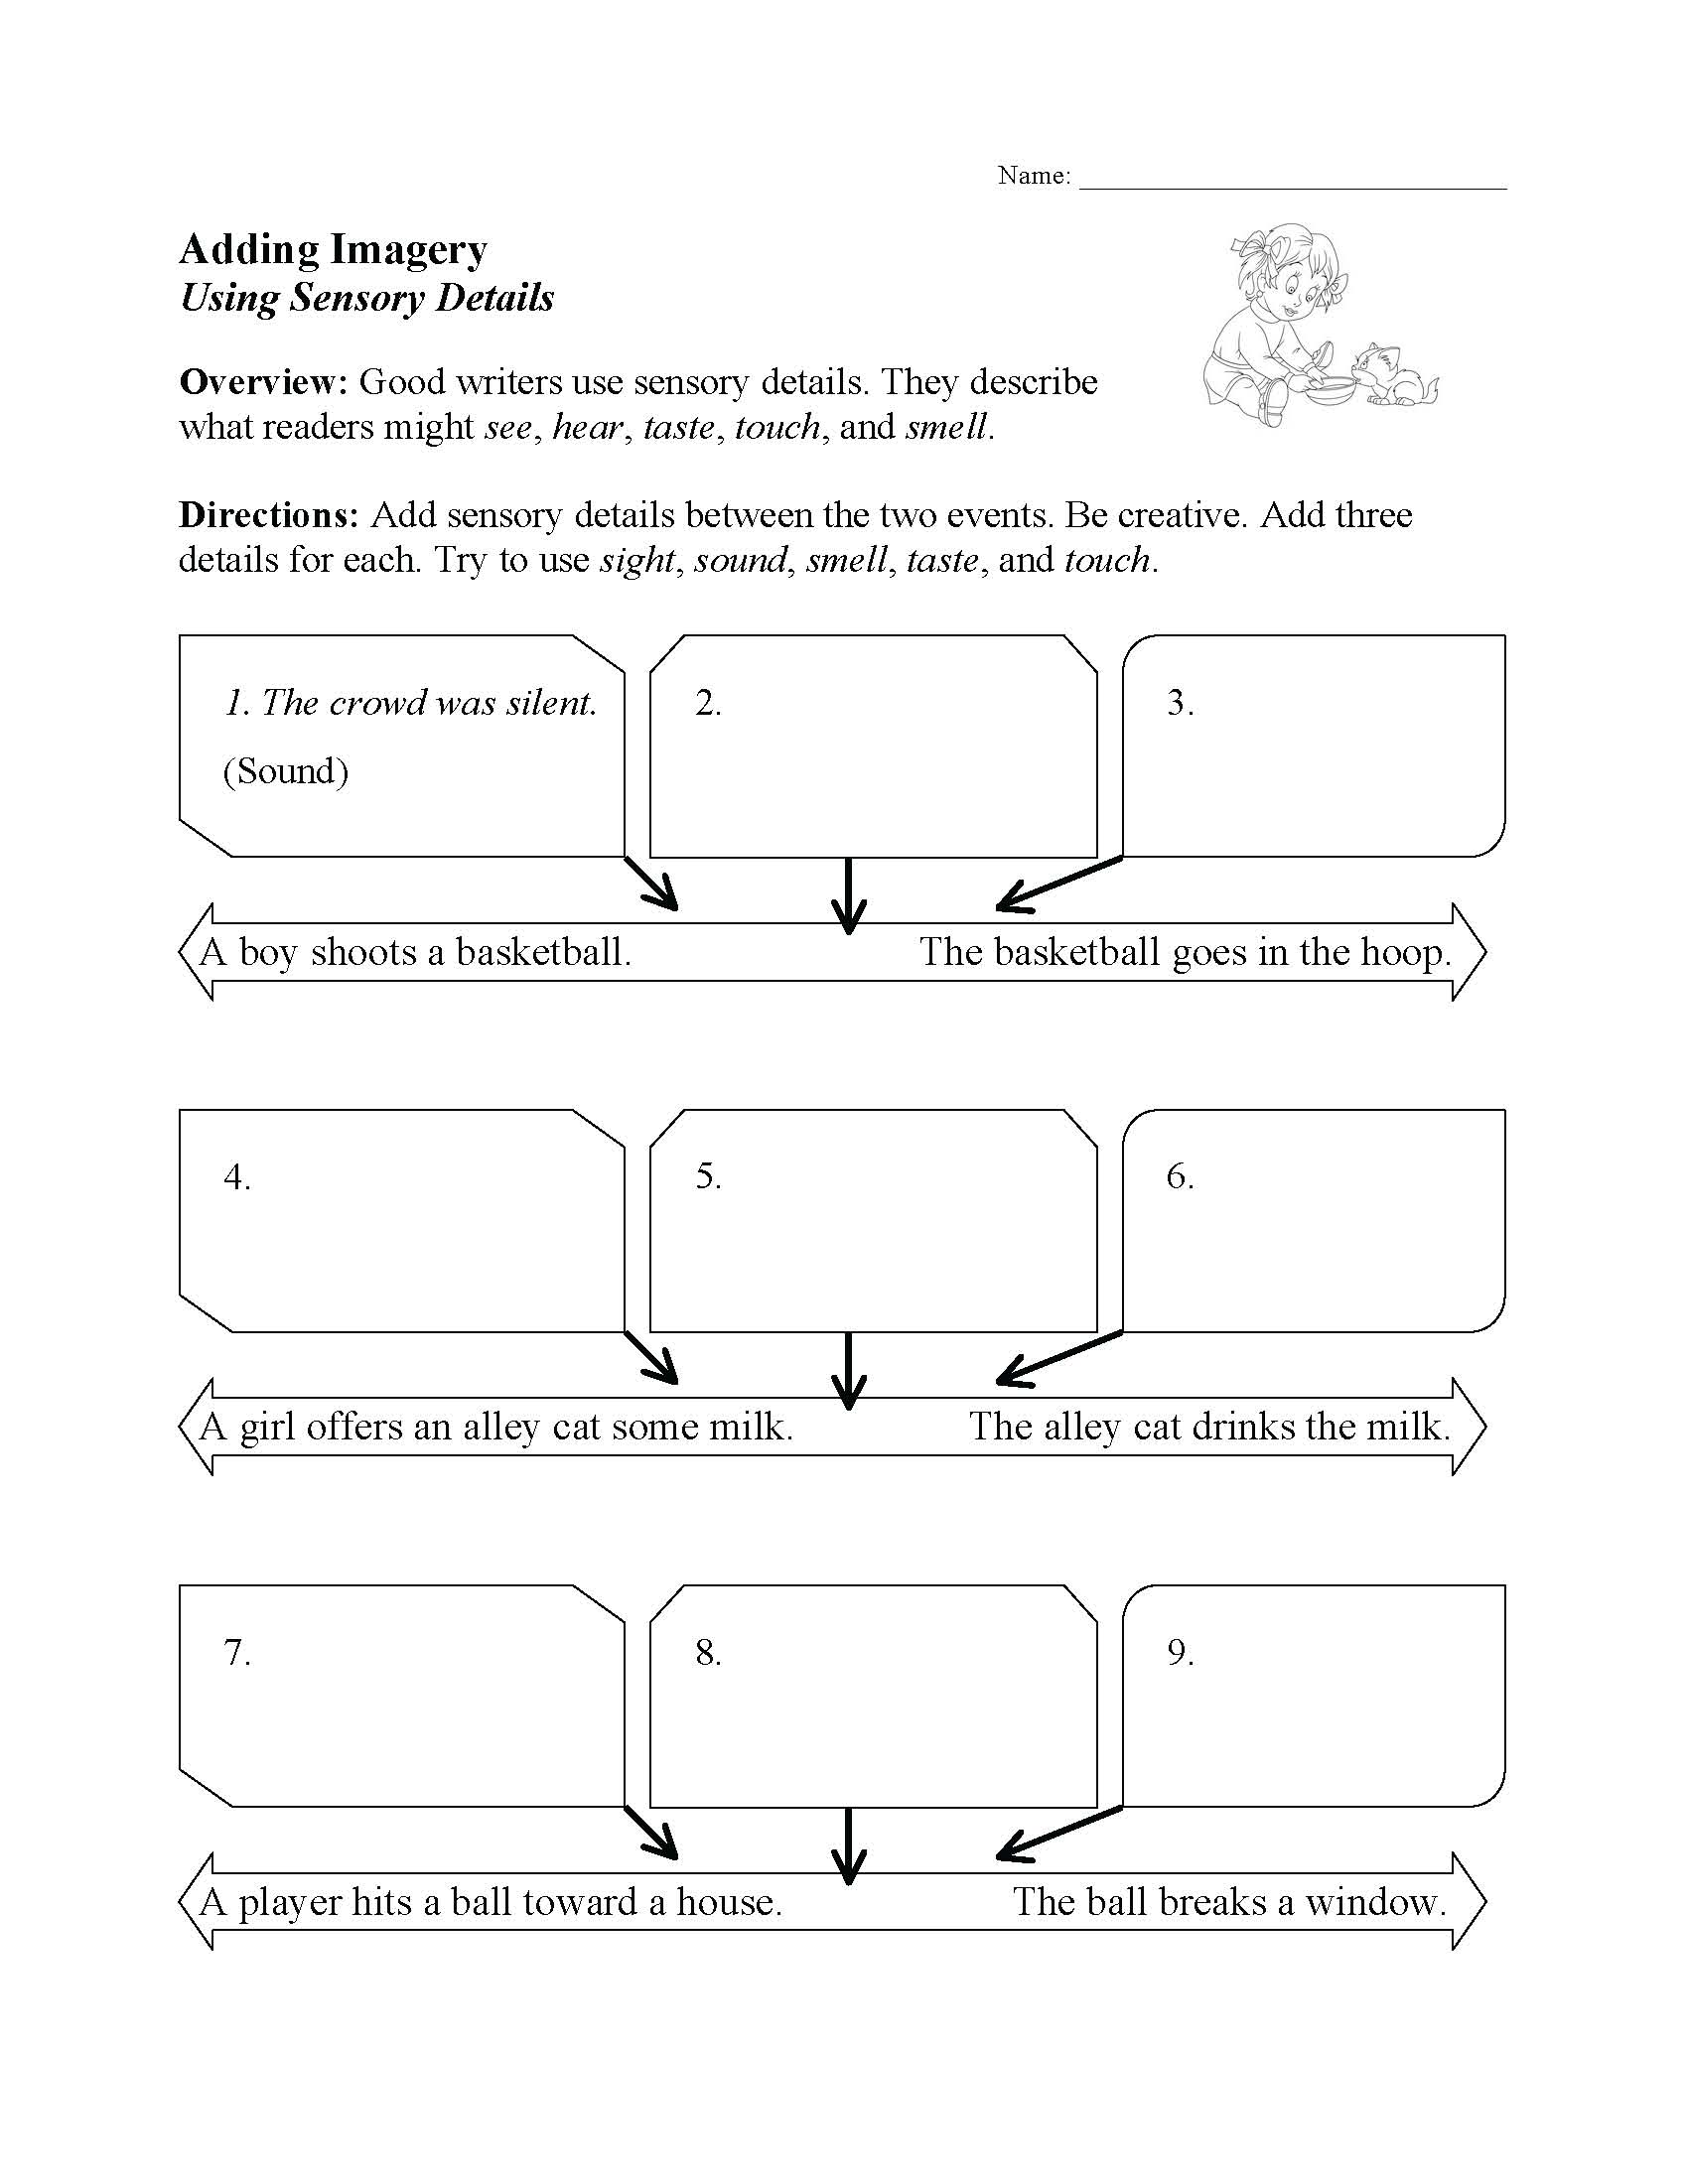 This is a preview image of our Imagery and Sensory Details Worksheet. Click on it to enlarge this image and view the source file.